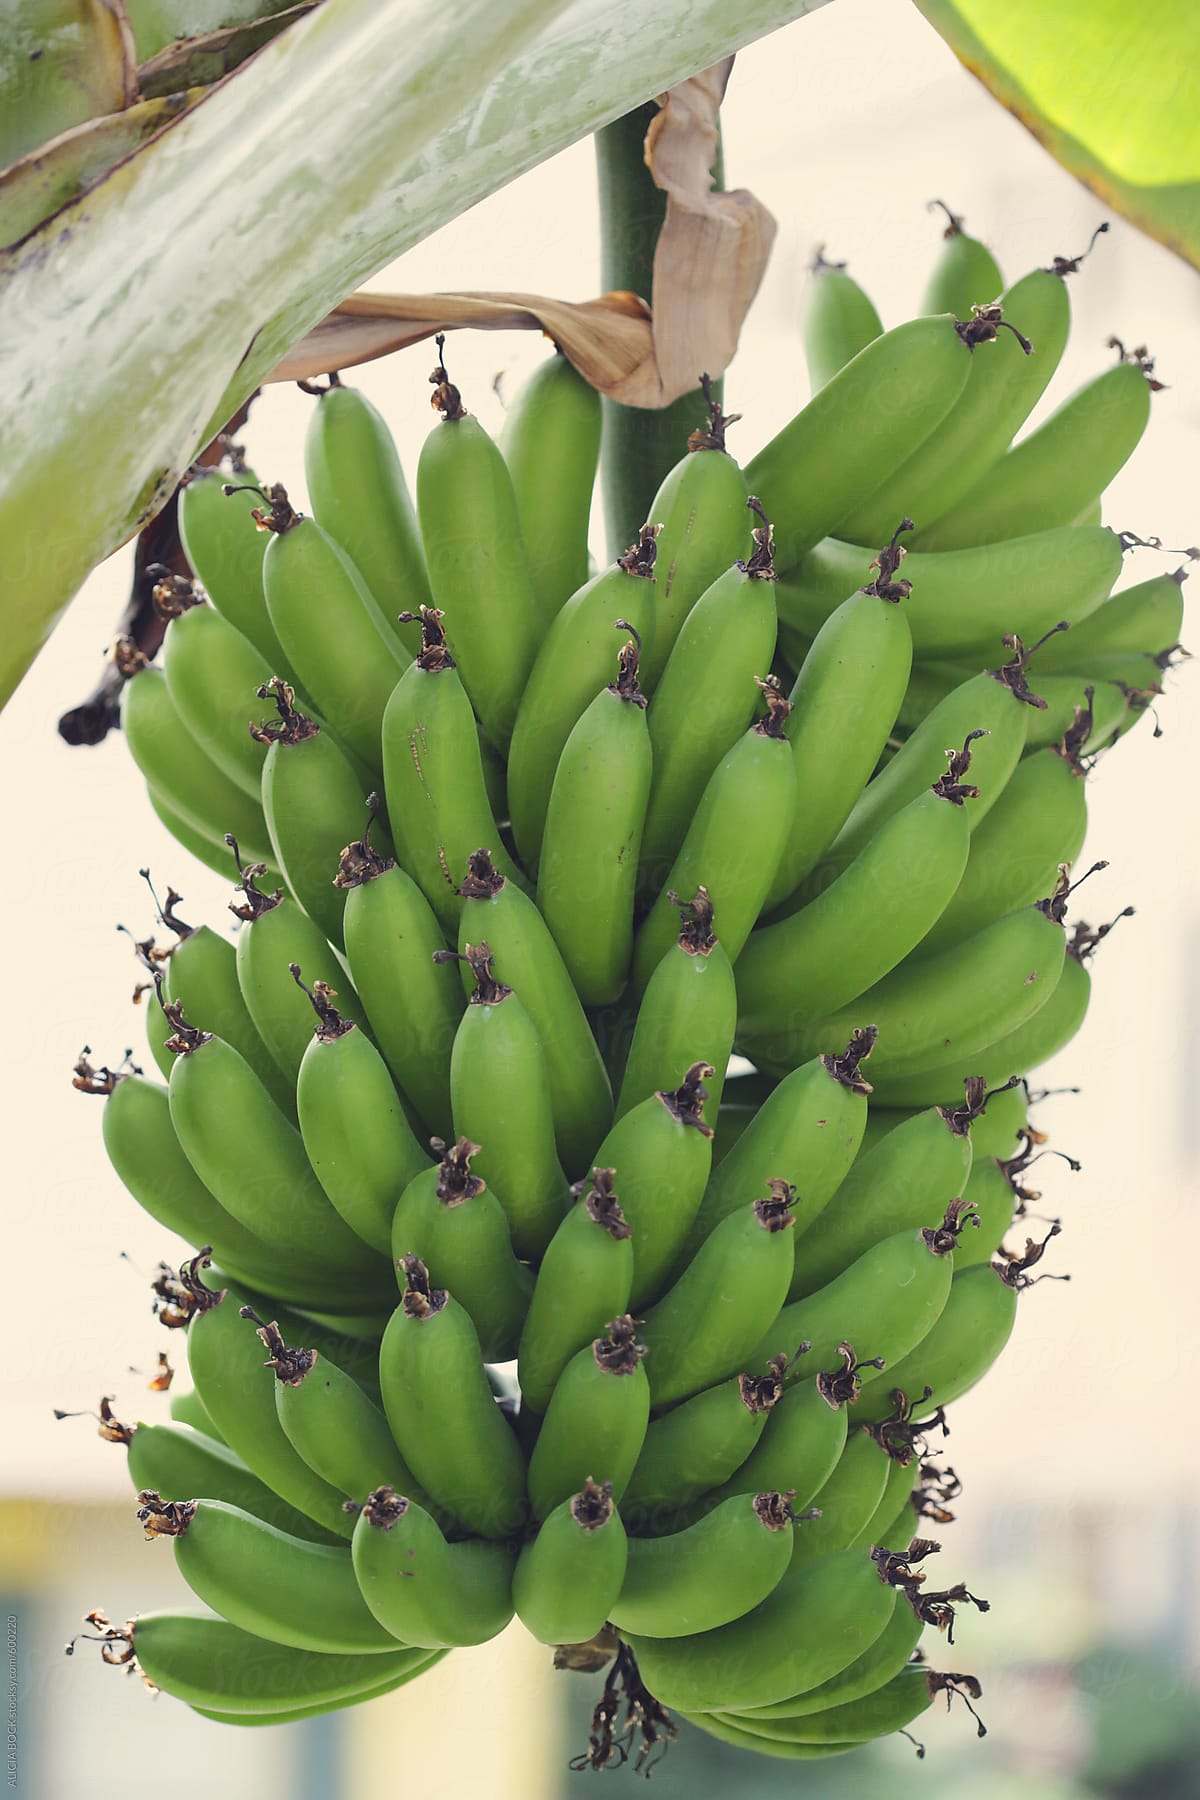 A Large Bunch Of Green Bananas Growing On A Tree